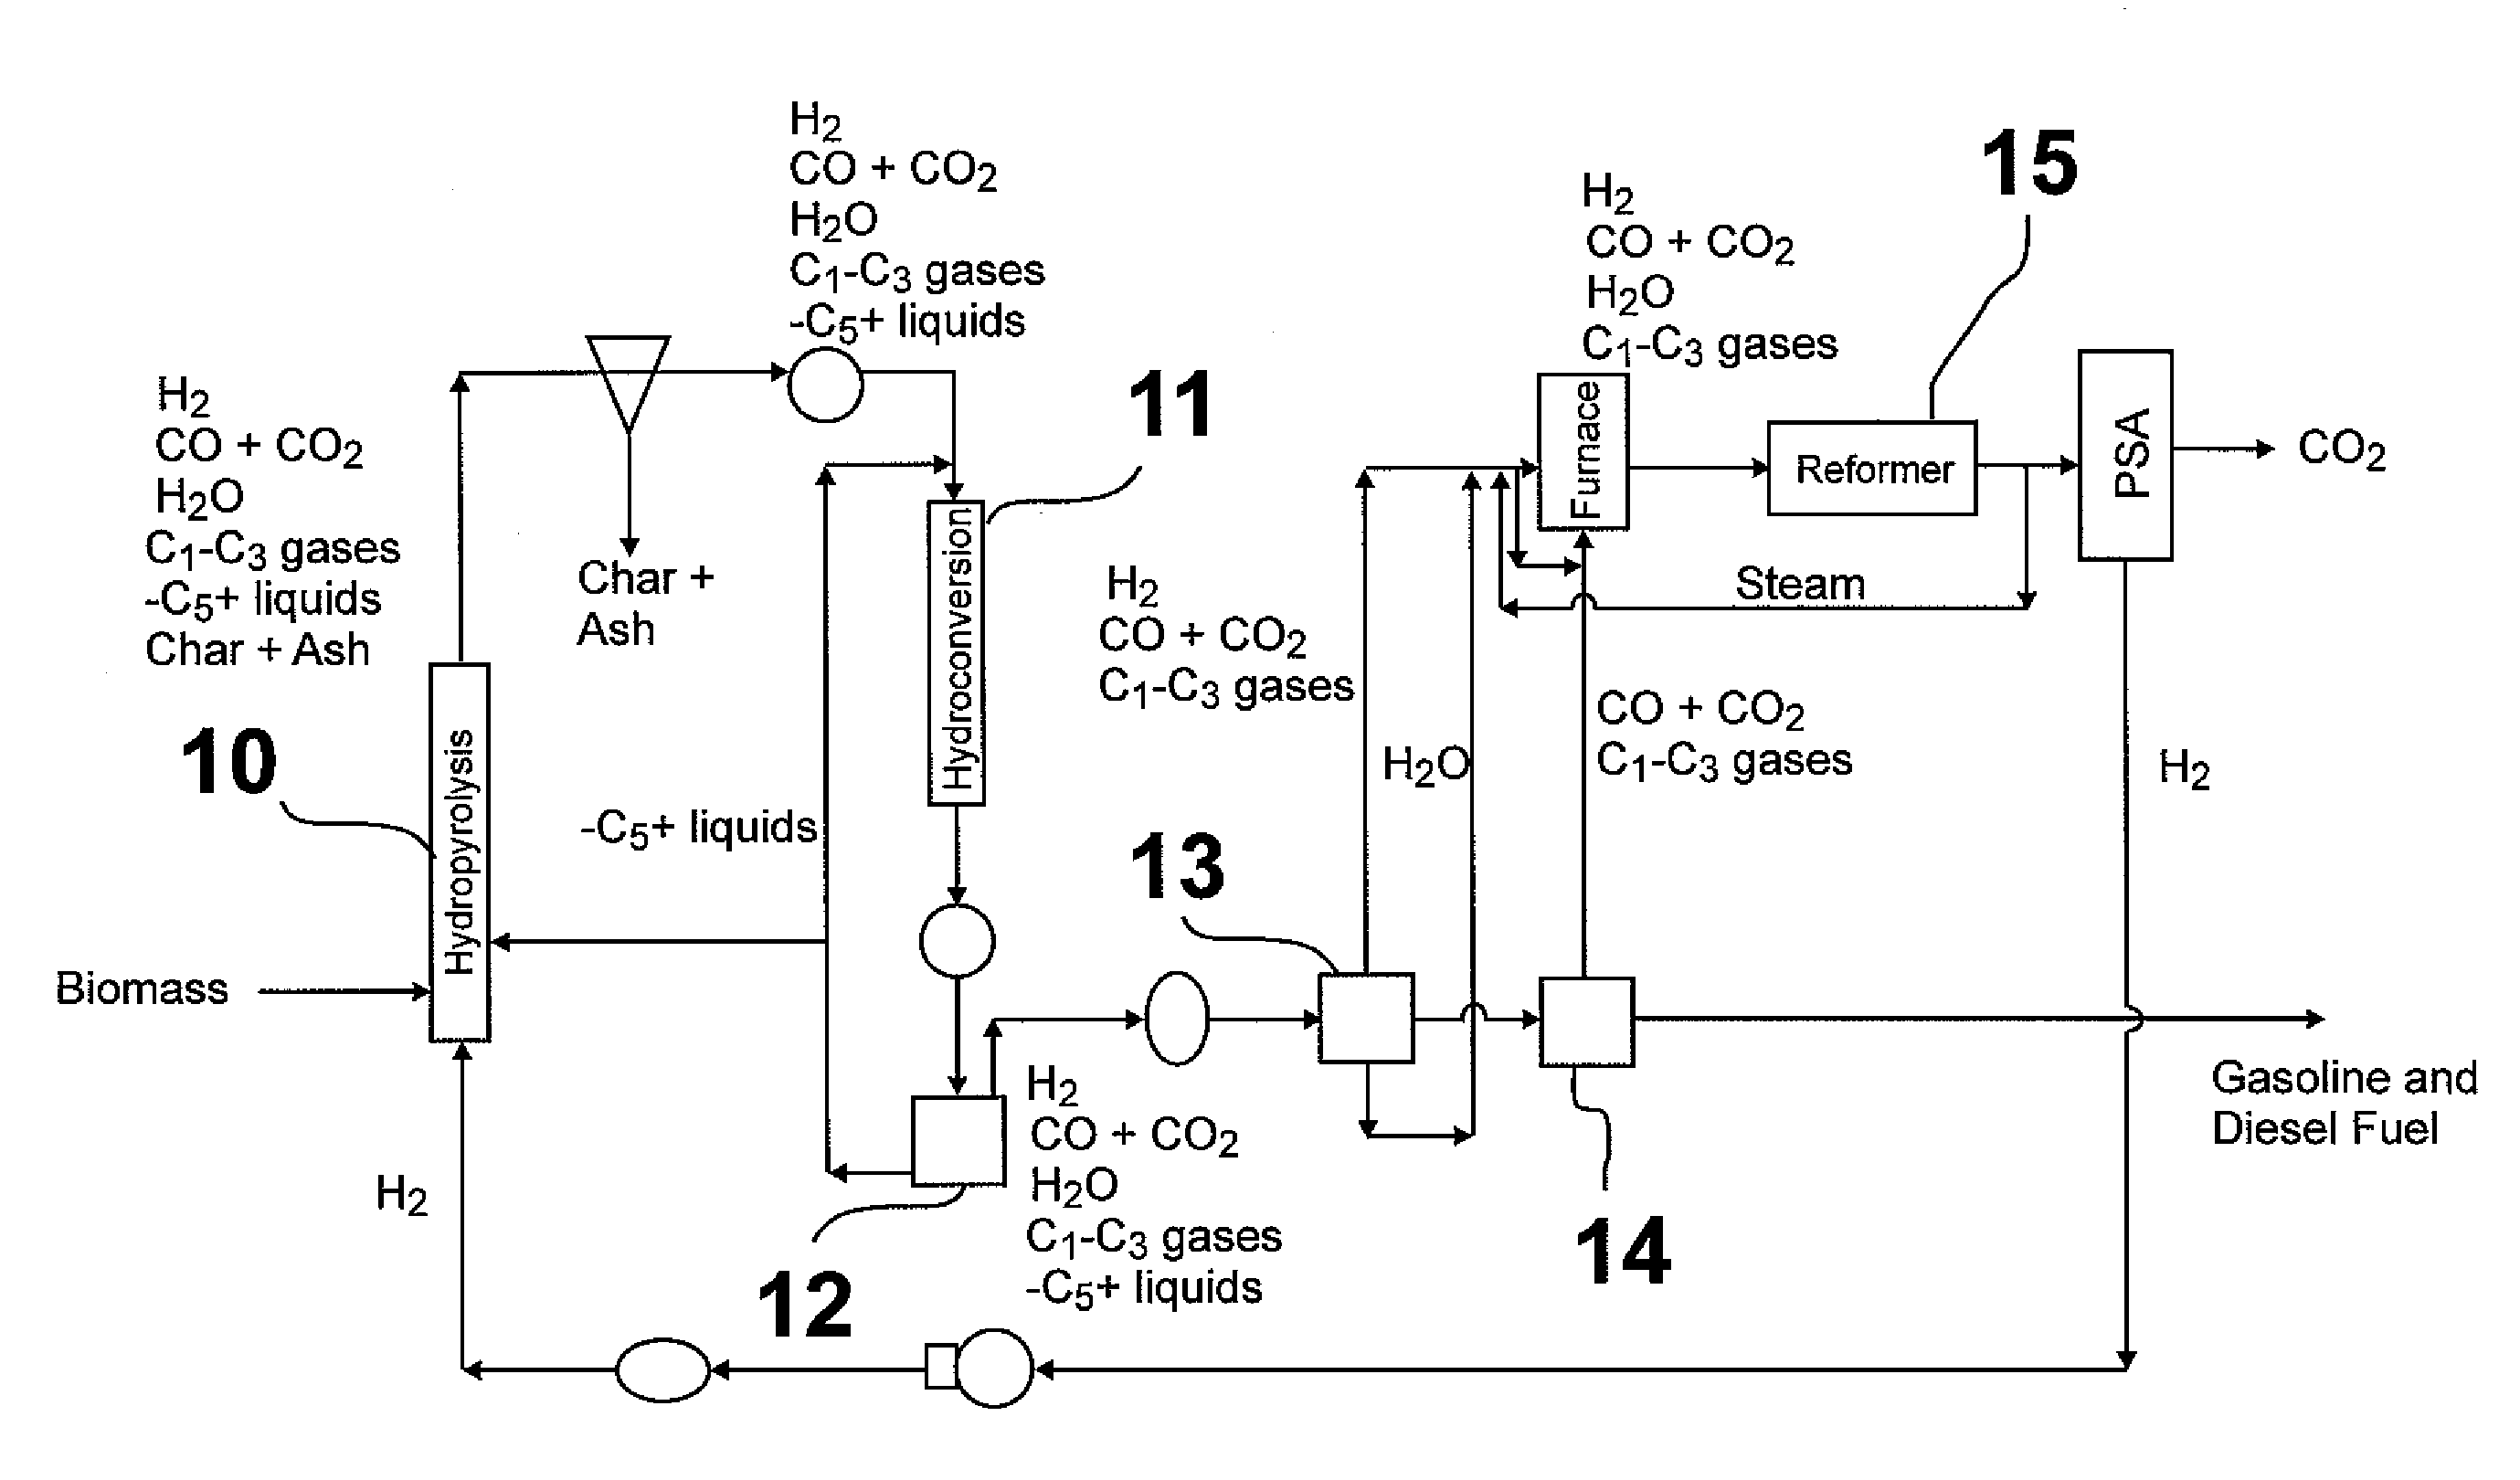 Hydropyrolysis of biomass for producing high quality liquid fuels